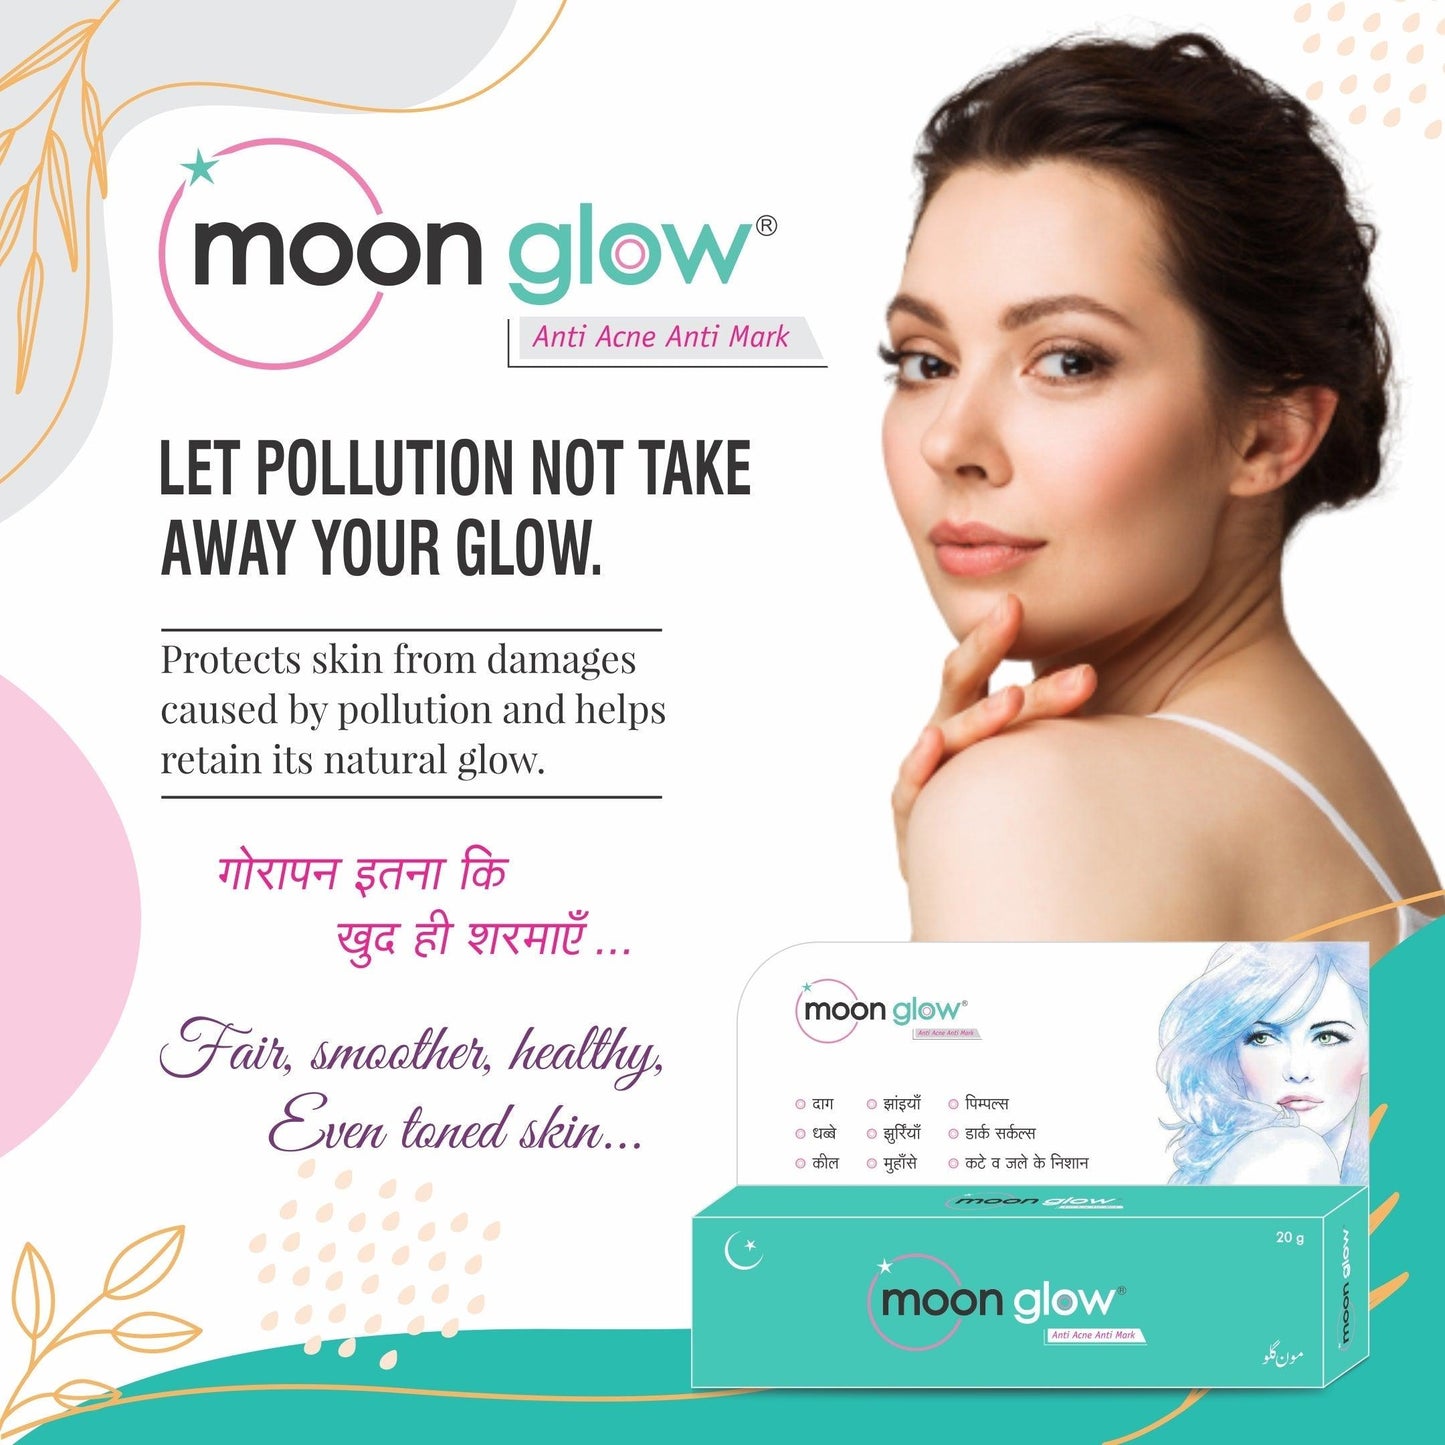 Moon Glow Cream, Pearl Face Wash and Soap for Acne, Pimples, Black Spots, Dark Circles, Stretch Marks, Anti-Aging and Fairness (1 Cream + 1 Pearl Face Wash +1 Soap) - Olefia Biopharma Limited